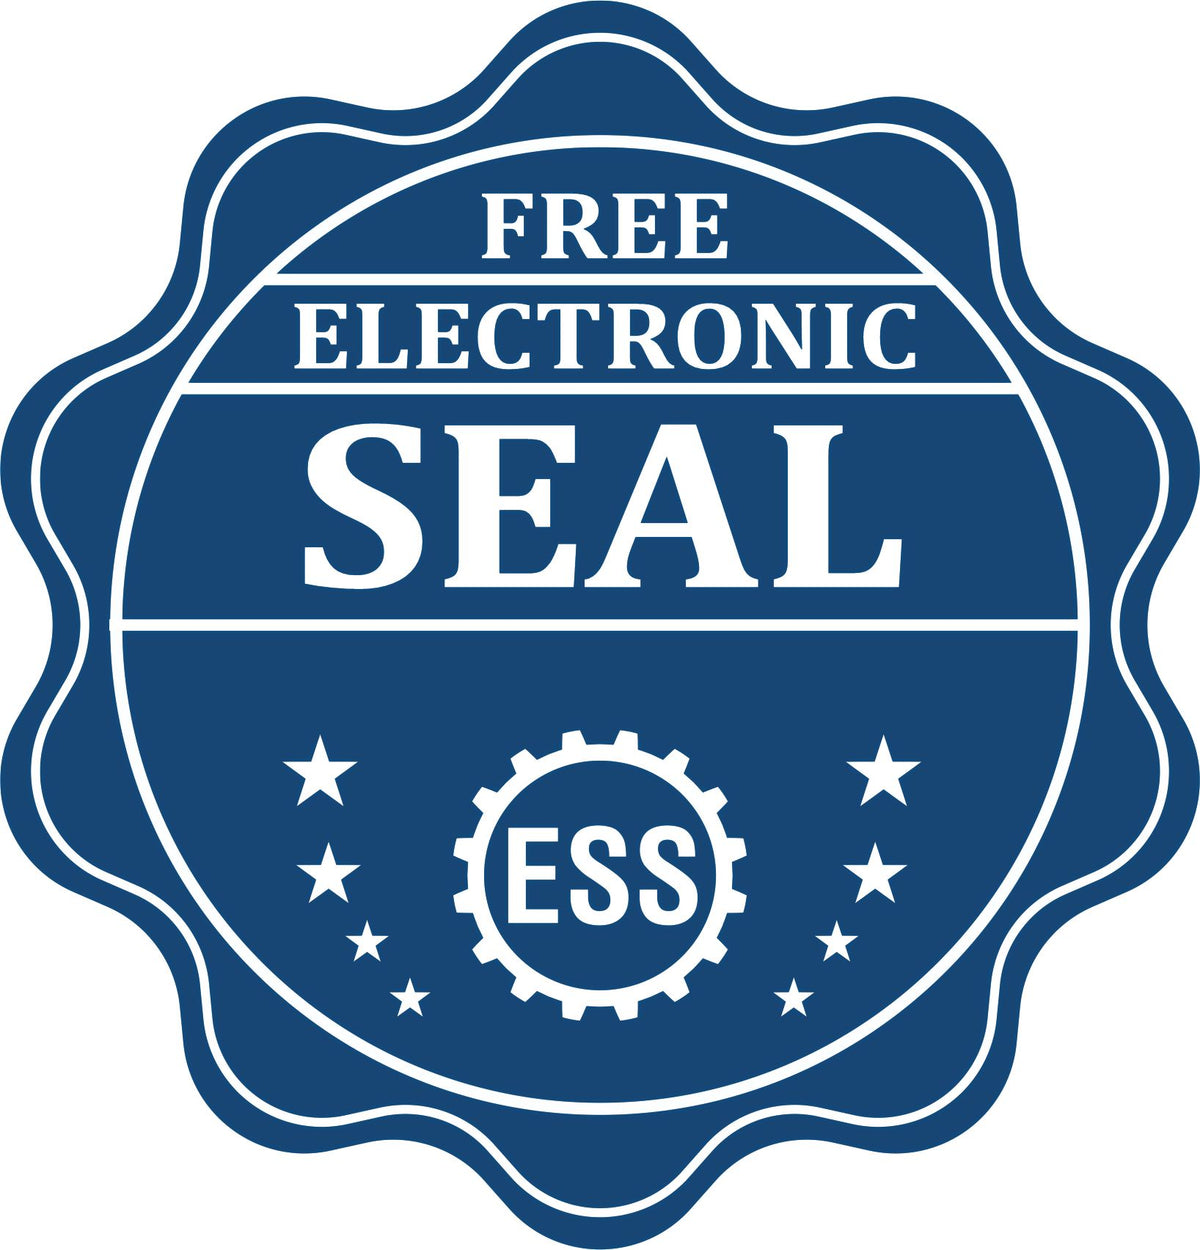 A badge showing a free electronic seal for the Slim Pre-Inked New Jersey Professional Geologist Seal Stamp with stars and the ESS gear on the emblem.